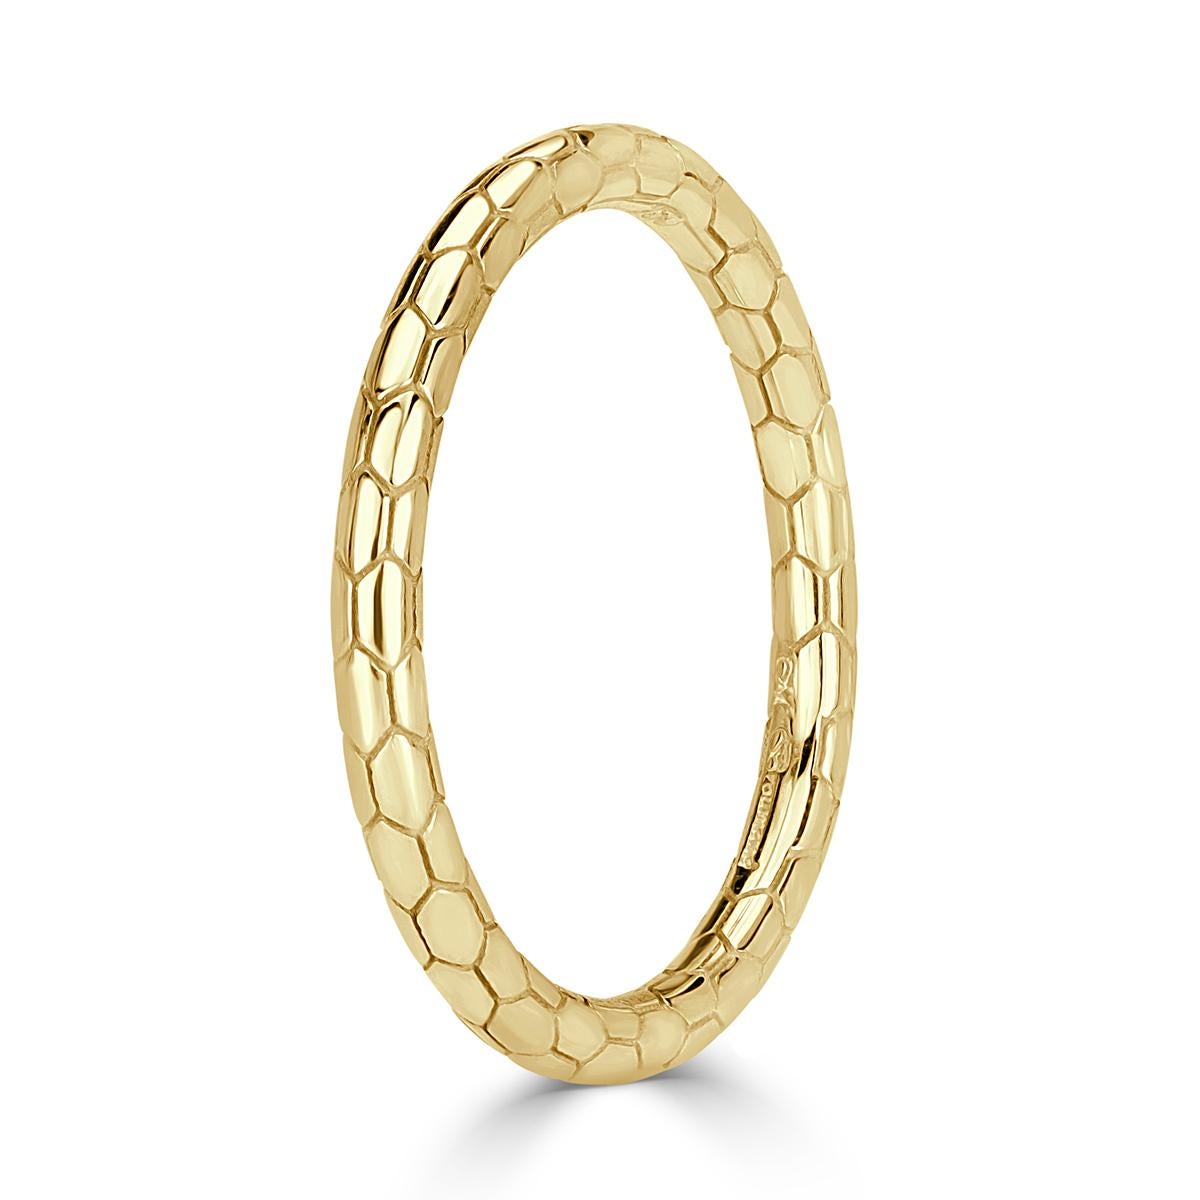 Custom created in 18k yellow gold, this stylish and feminine wedding band showcases a ravishing scale design throughout. It also comes in 18k rose, white gold and platinum.